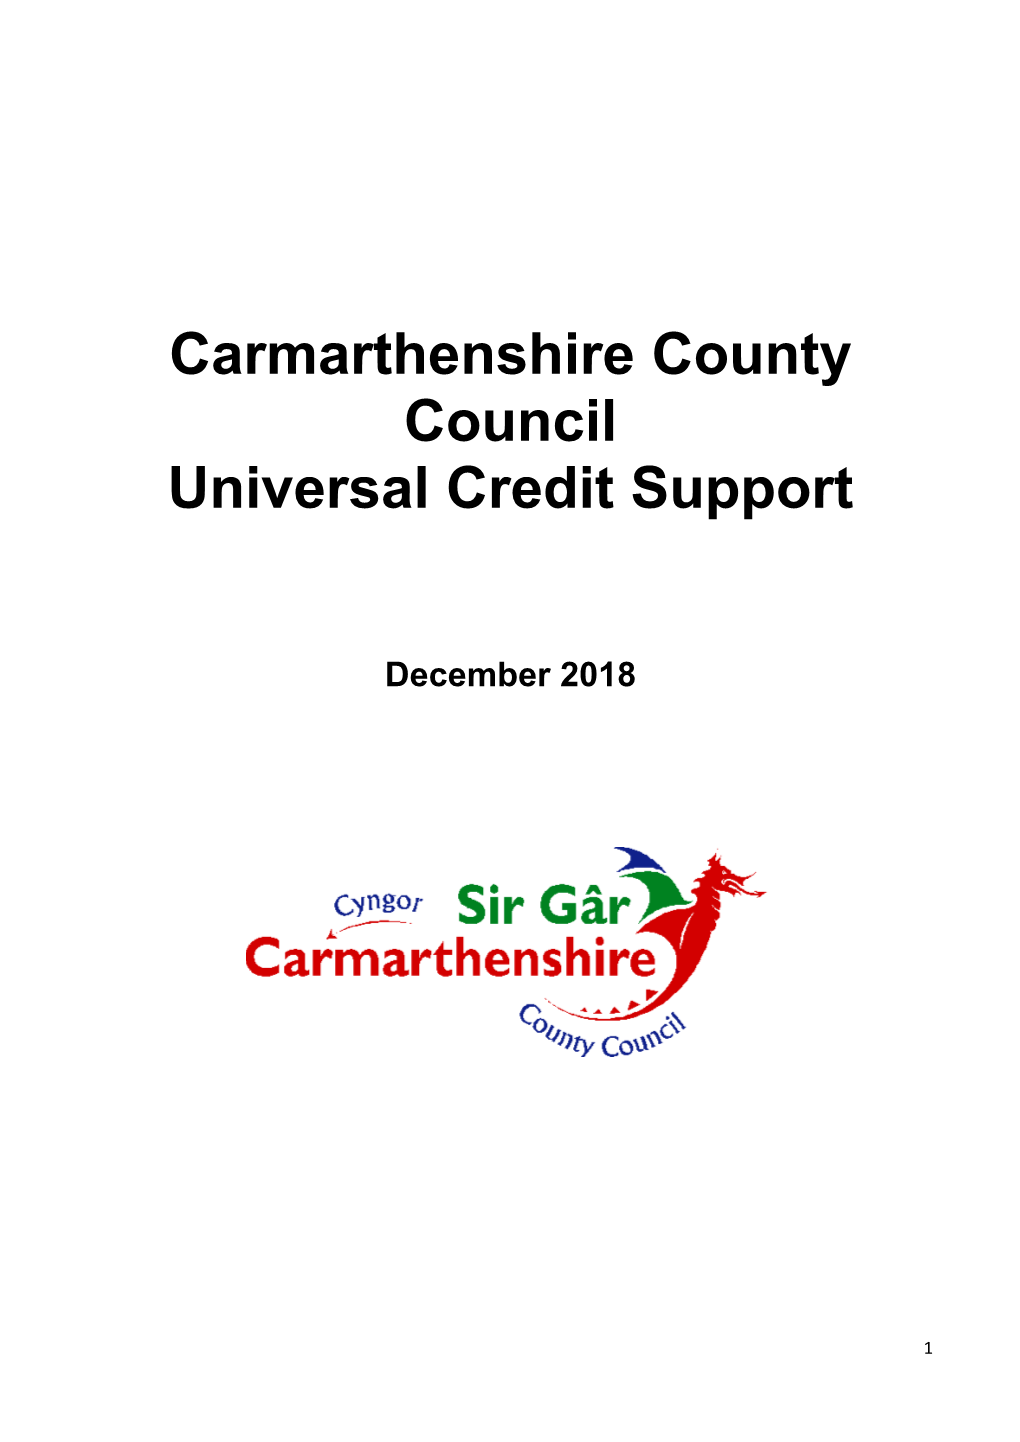 Carmarthenshire County Council Universal Credit Support